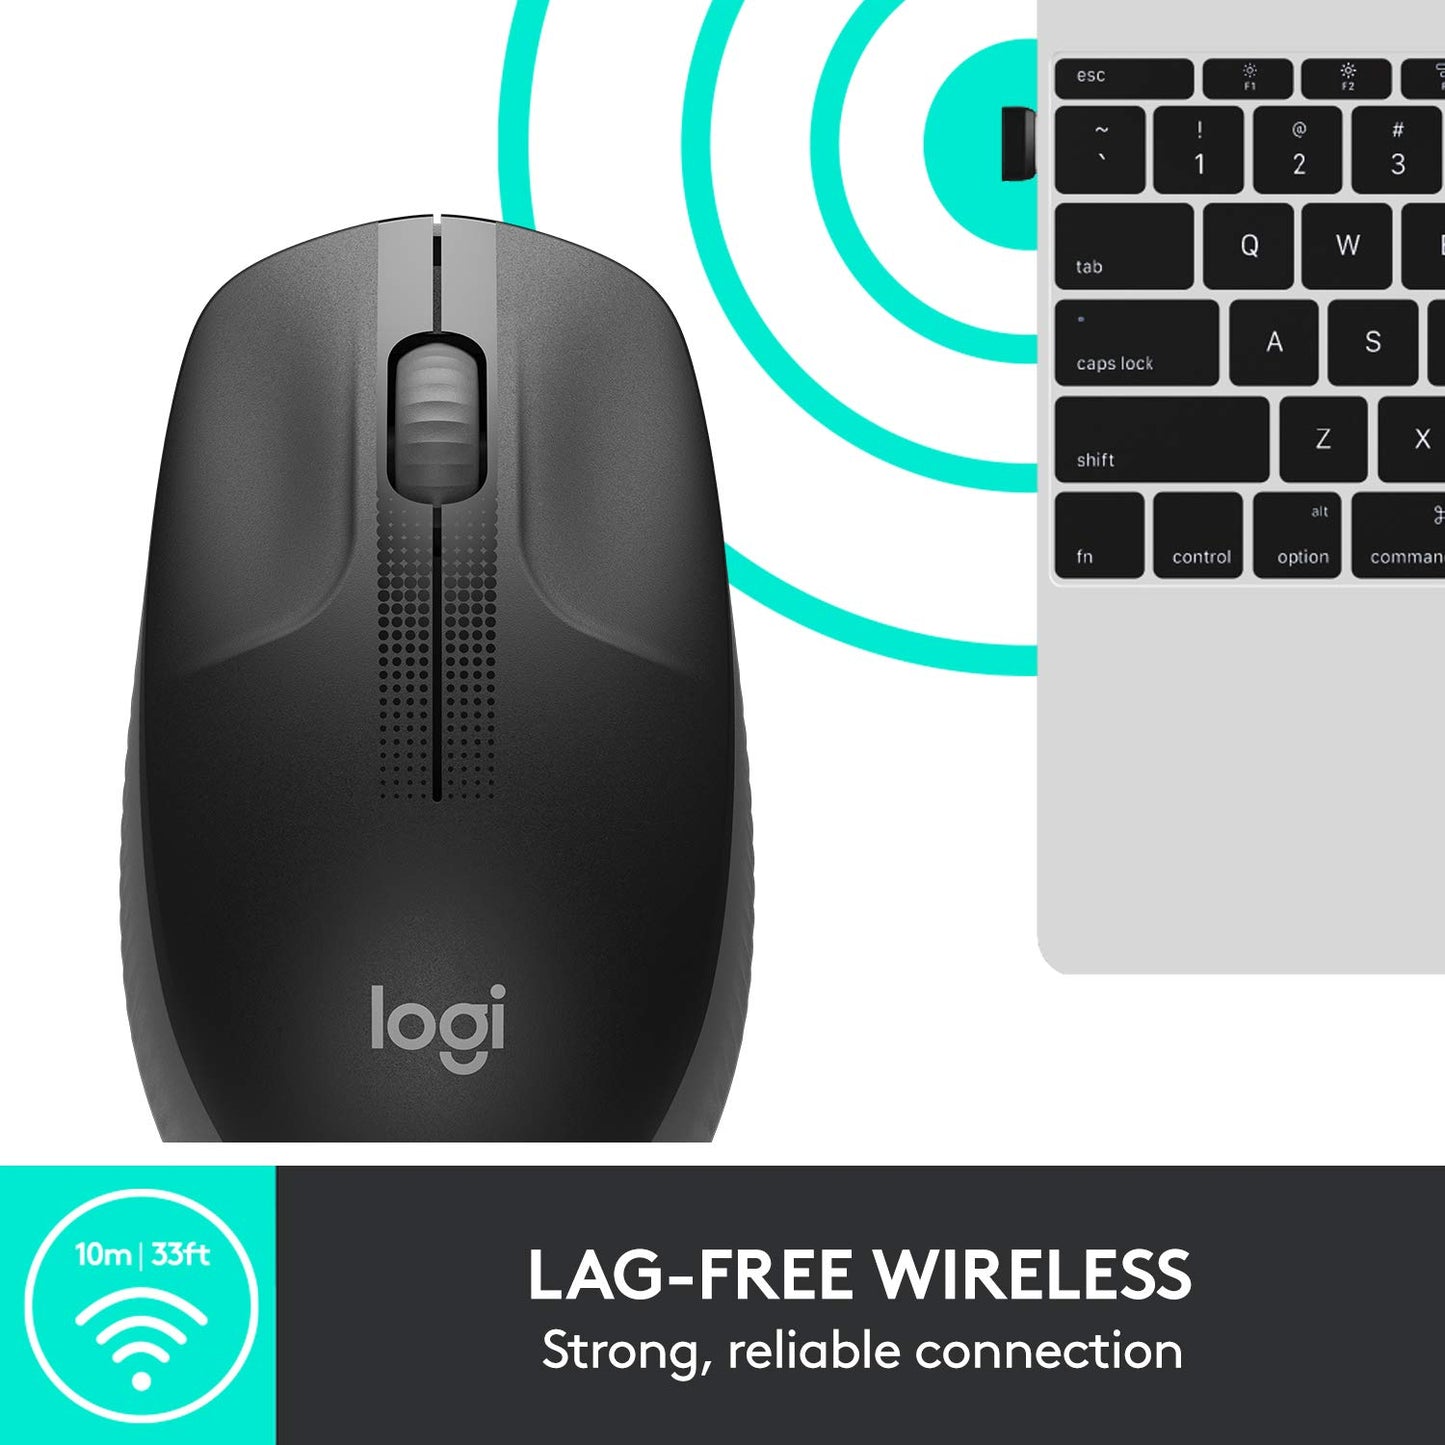 Logitech Wireless Mouse M191, Full Size Ambidextrous Curve Design, 18-Month Battery with Power Saving Mode, USB Receiver, Precise Cursor Control + Scrolling, Wide Scroll Wheel, Scooped Buttons - Black-MOUSE-Logitech-computerspace